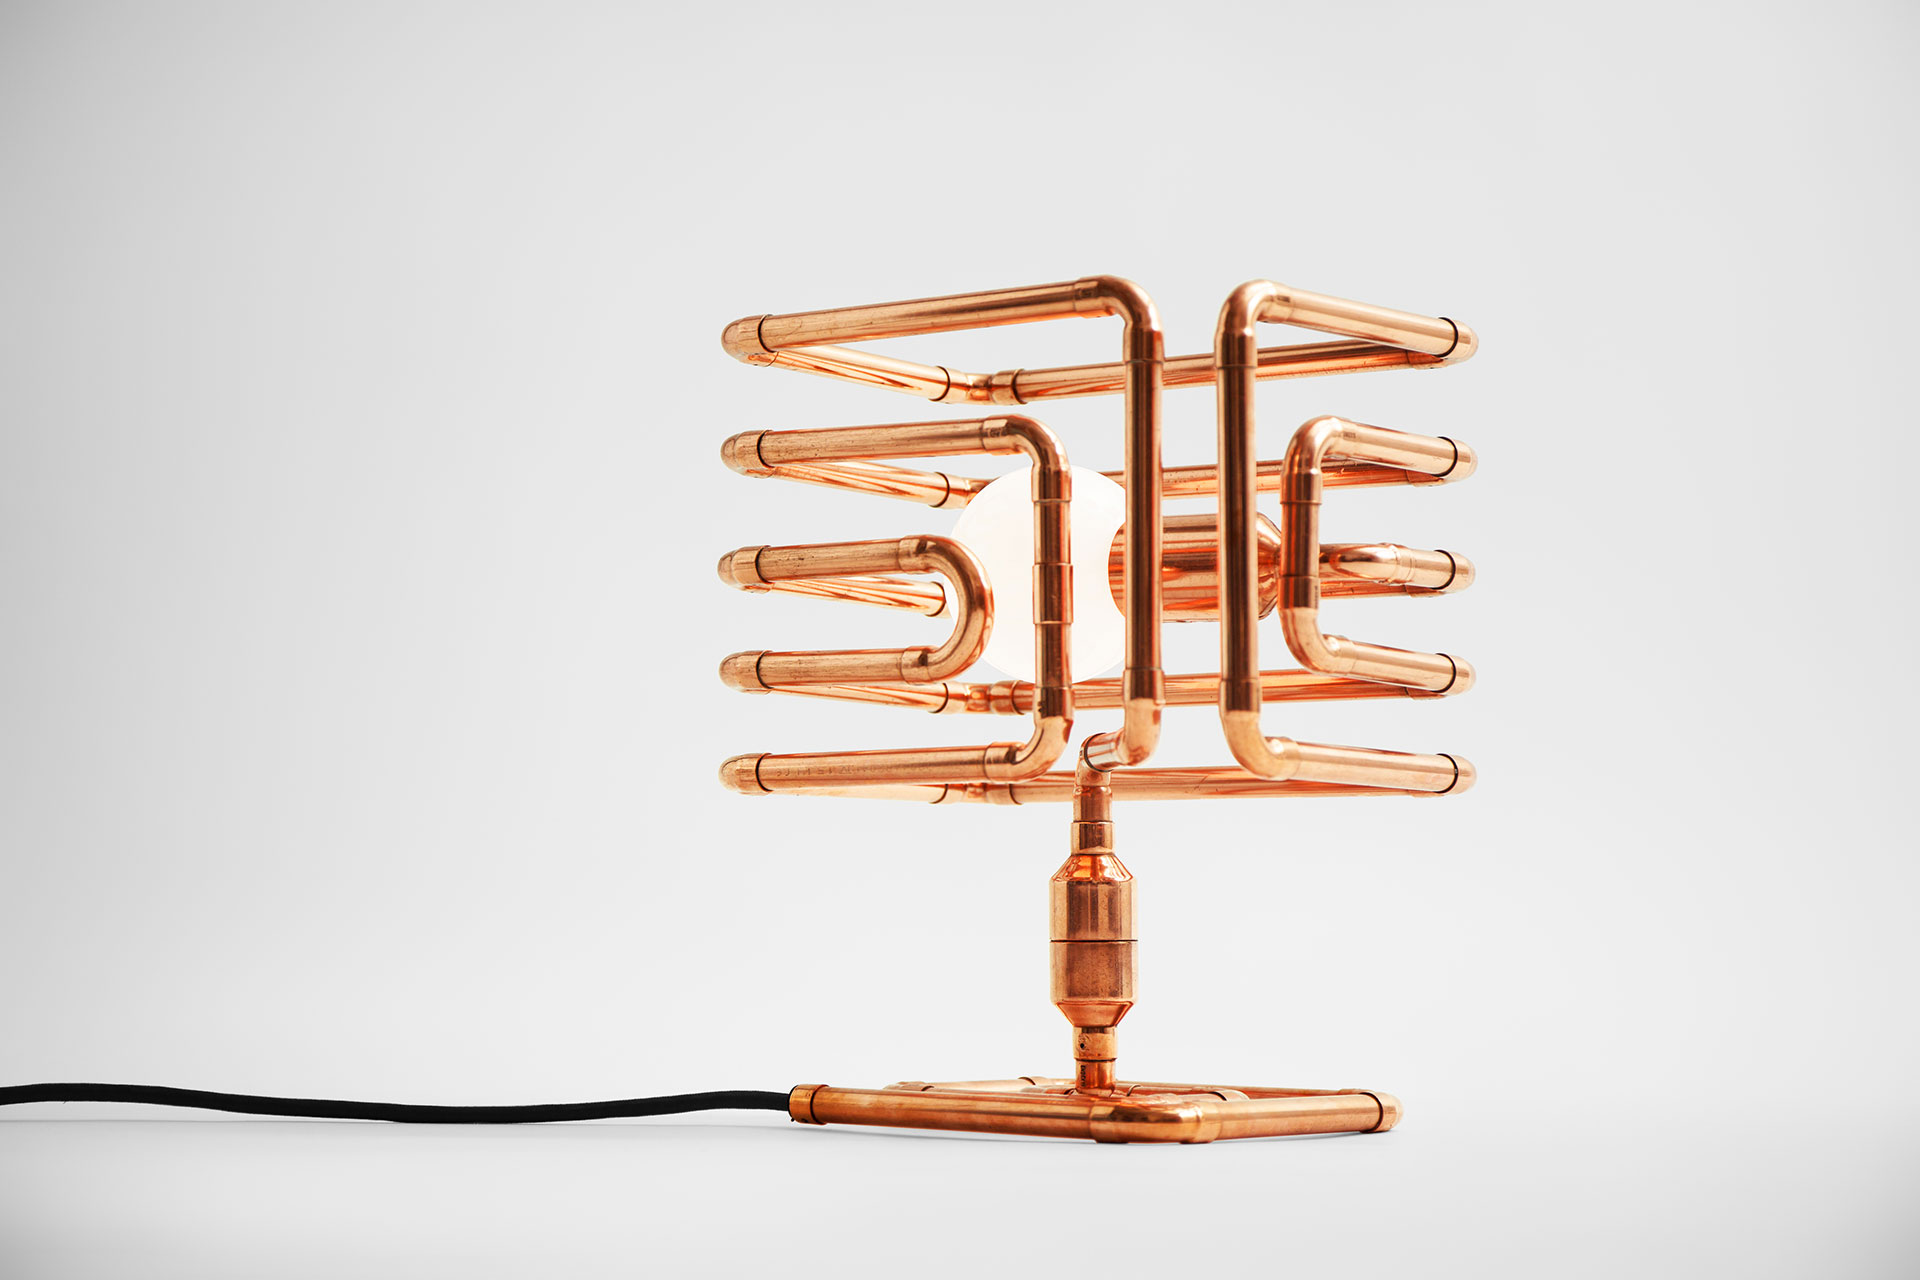 Futuristic design table lamp in trendy copper metal finish inspired by conceptual pipe art